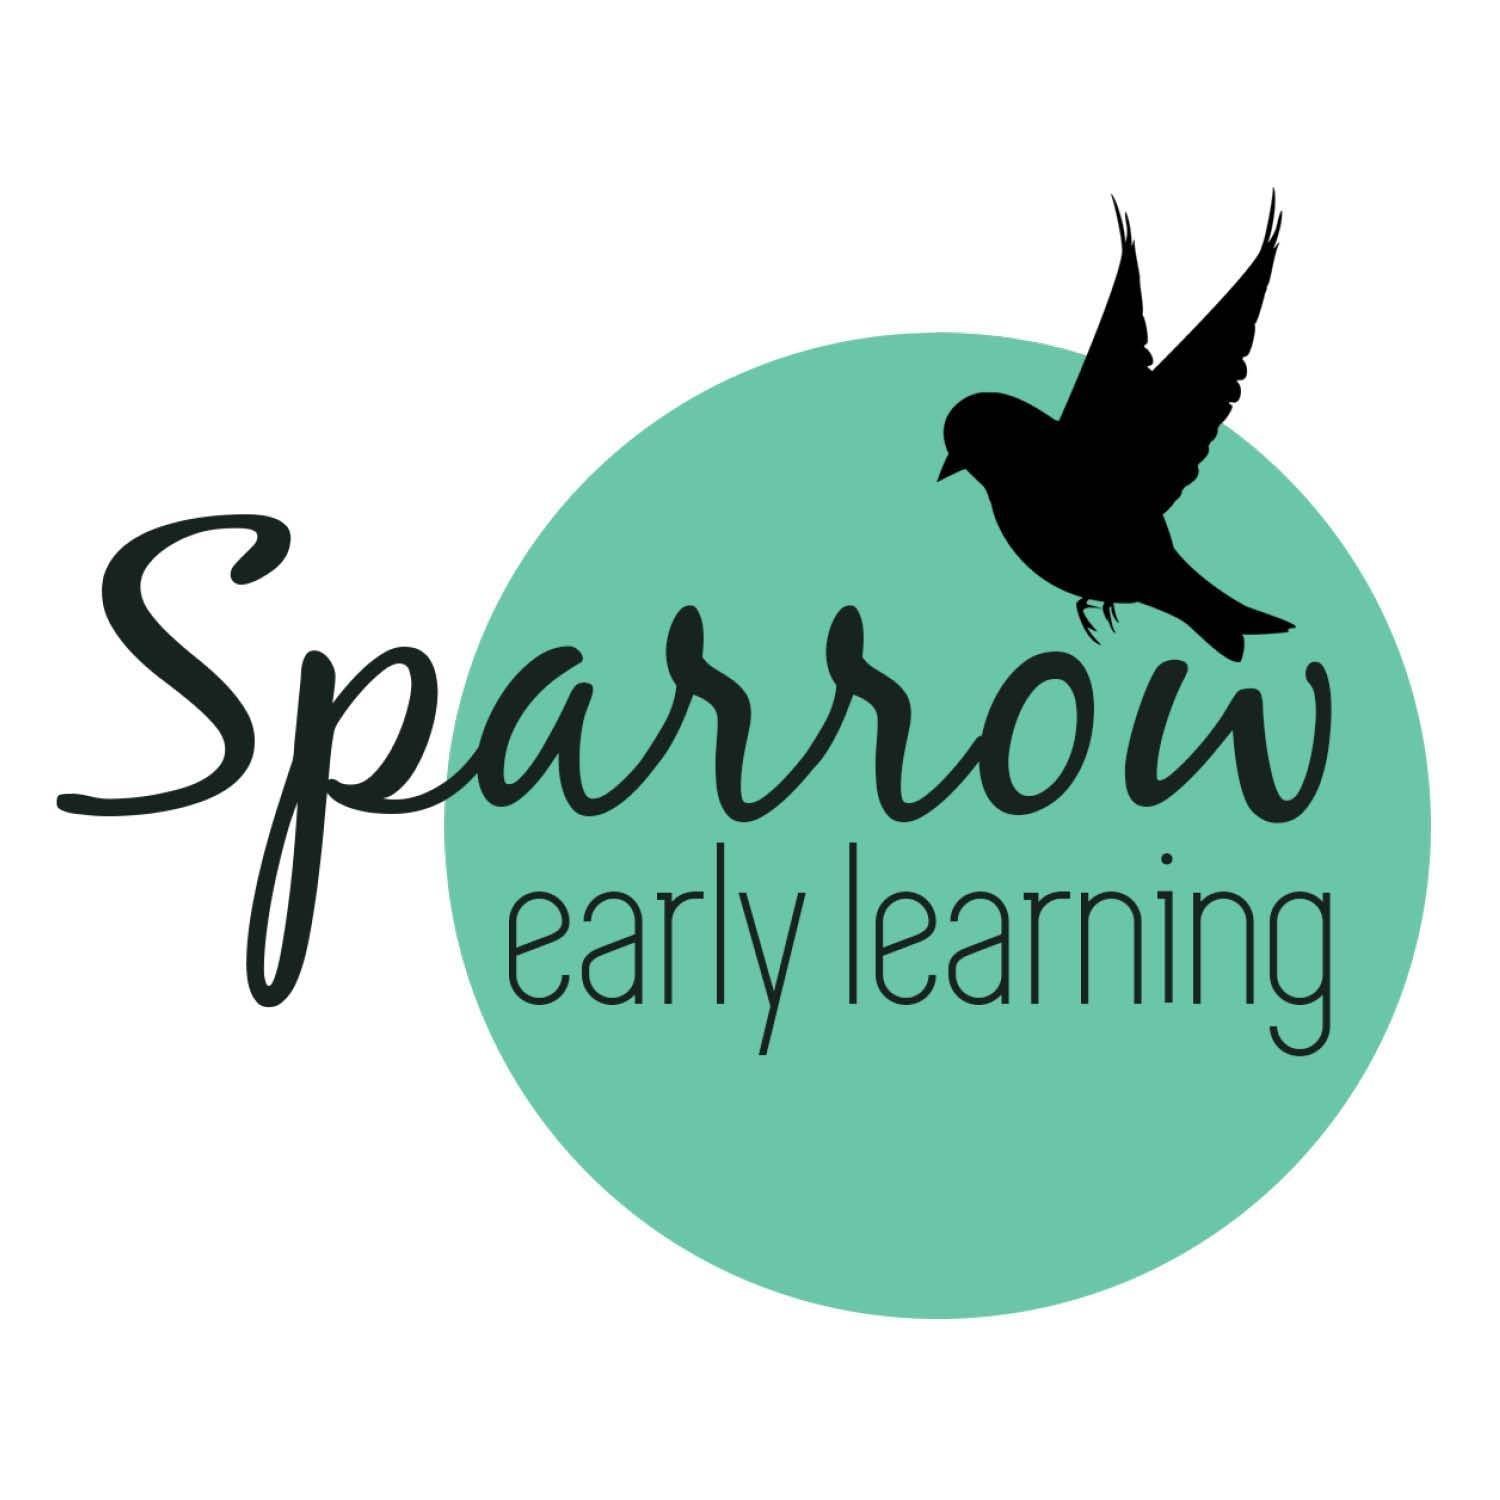 Sparrow Early Learning